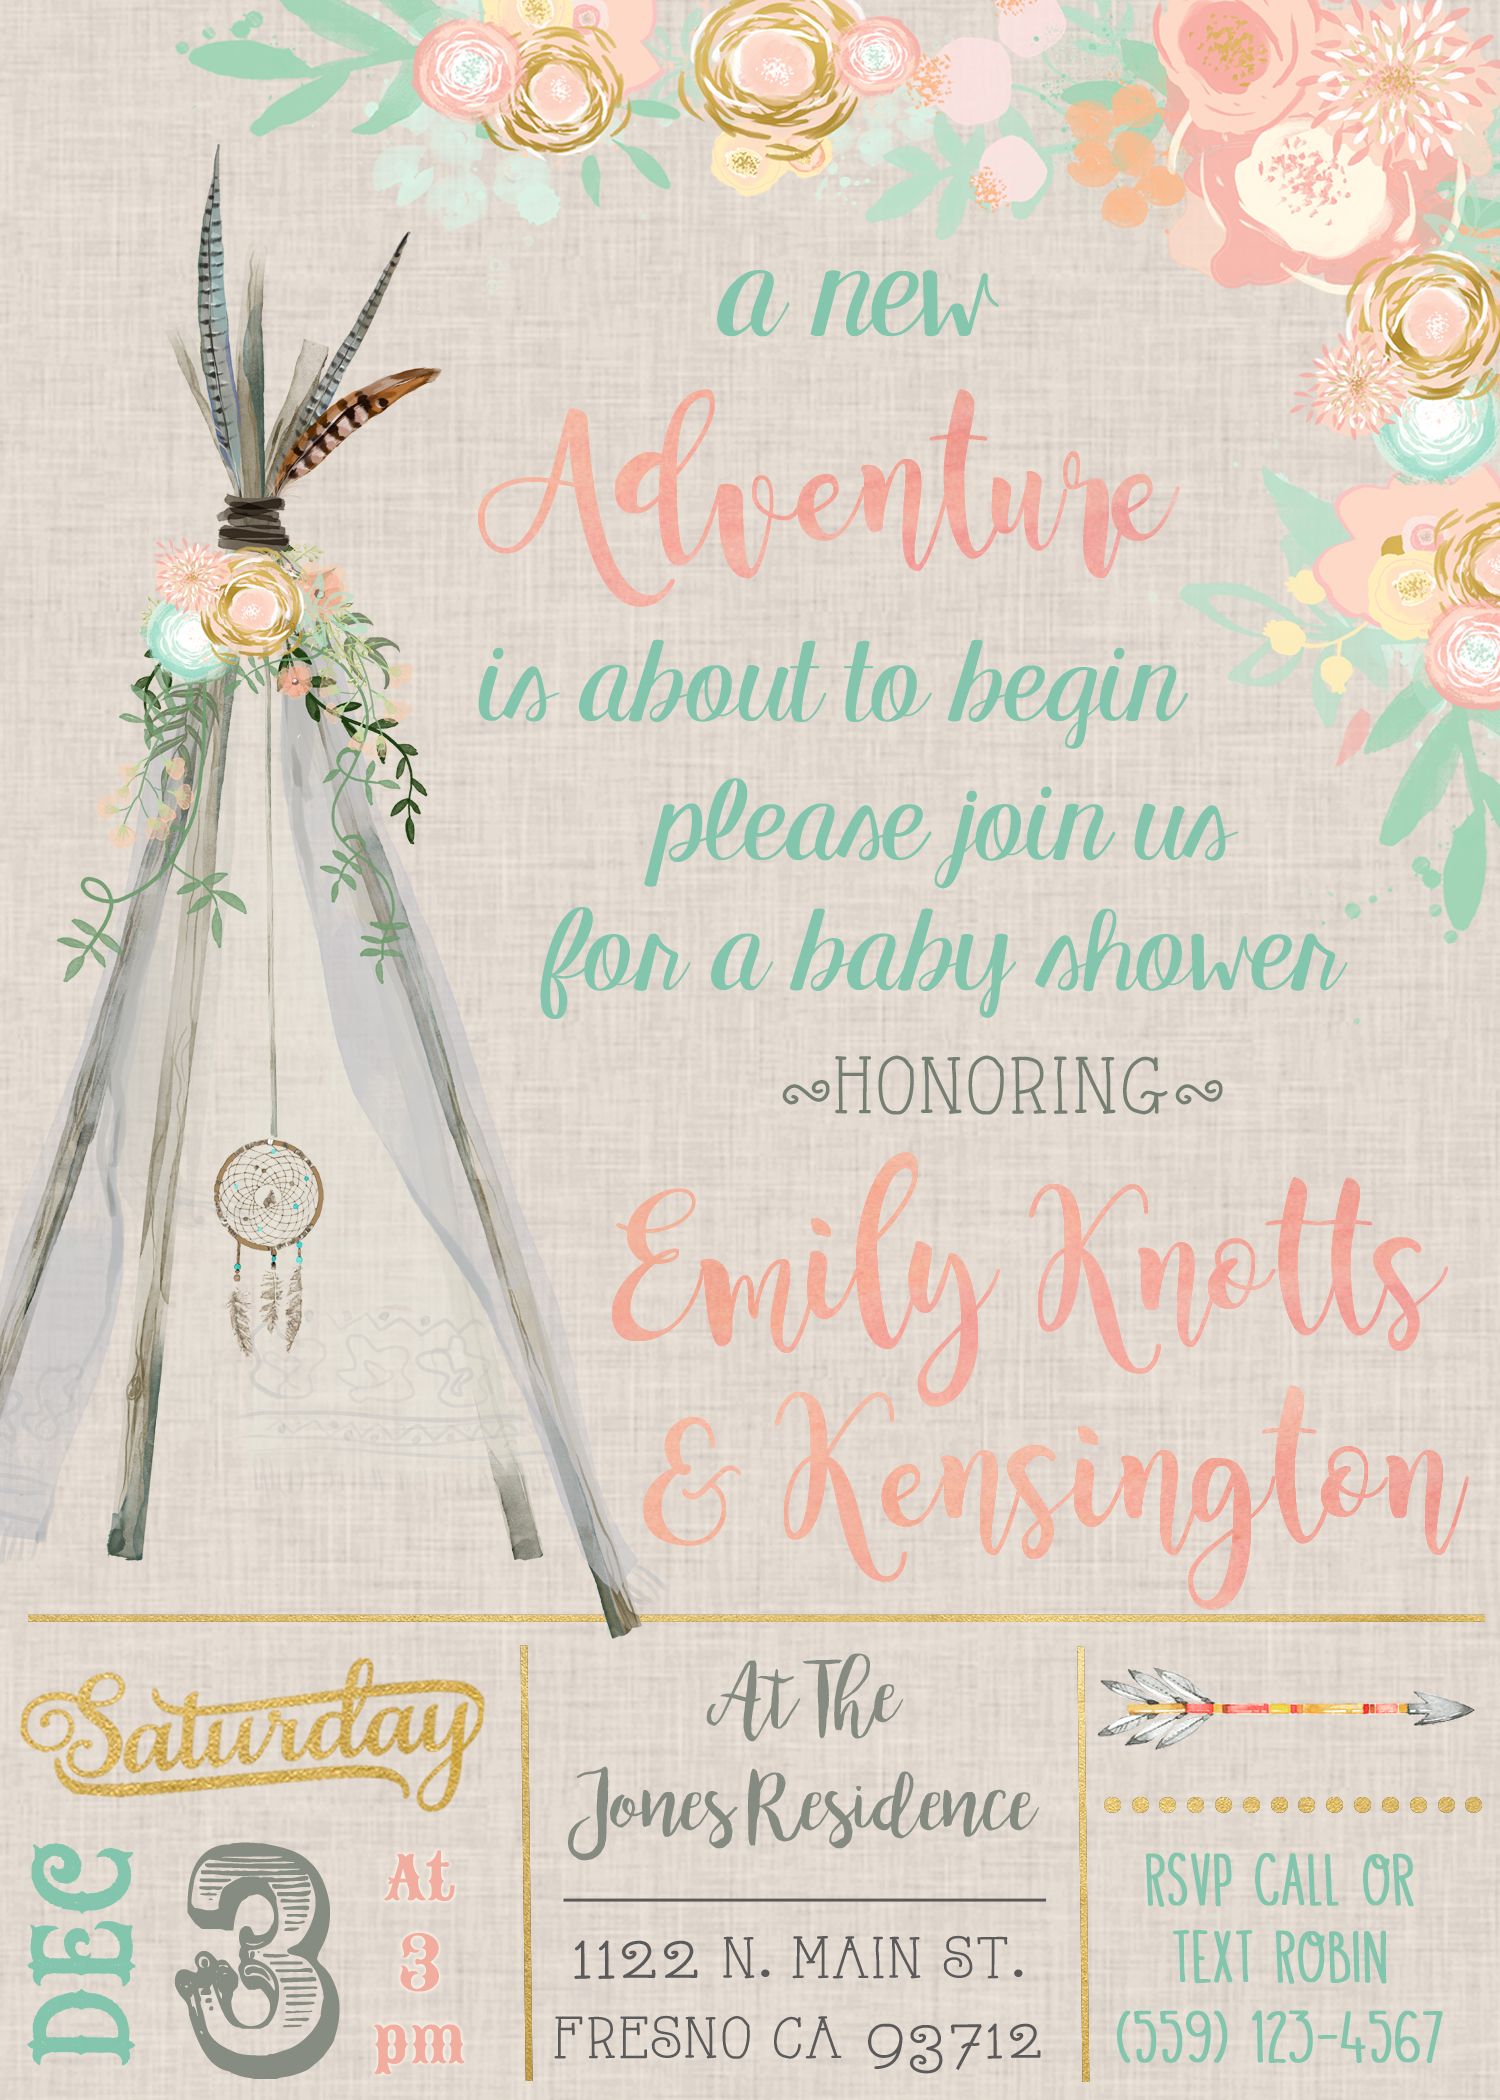 Full Size of Baby Shower:cheap Invitations Baby Shower Homemade Baby Shower Decorations Baby Shower Centerpiece Ideas For Boys Homemade Baby Shower Centerpieces Baby Girl Themes For Bedroom Baby Shower Centerpiece Ideas For Boys Invitations Oriental Trading Baby Shower